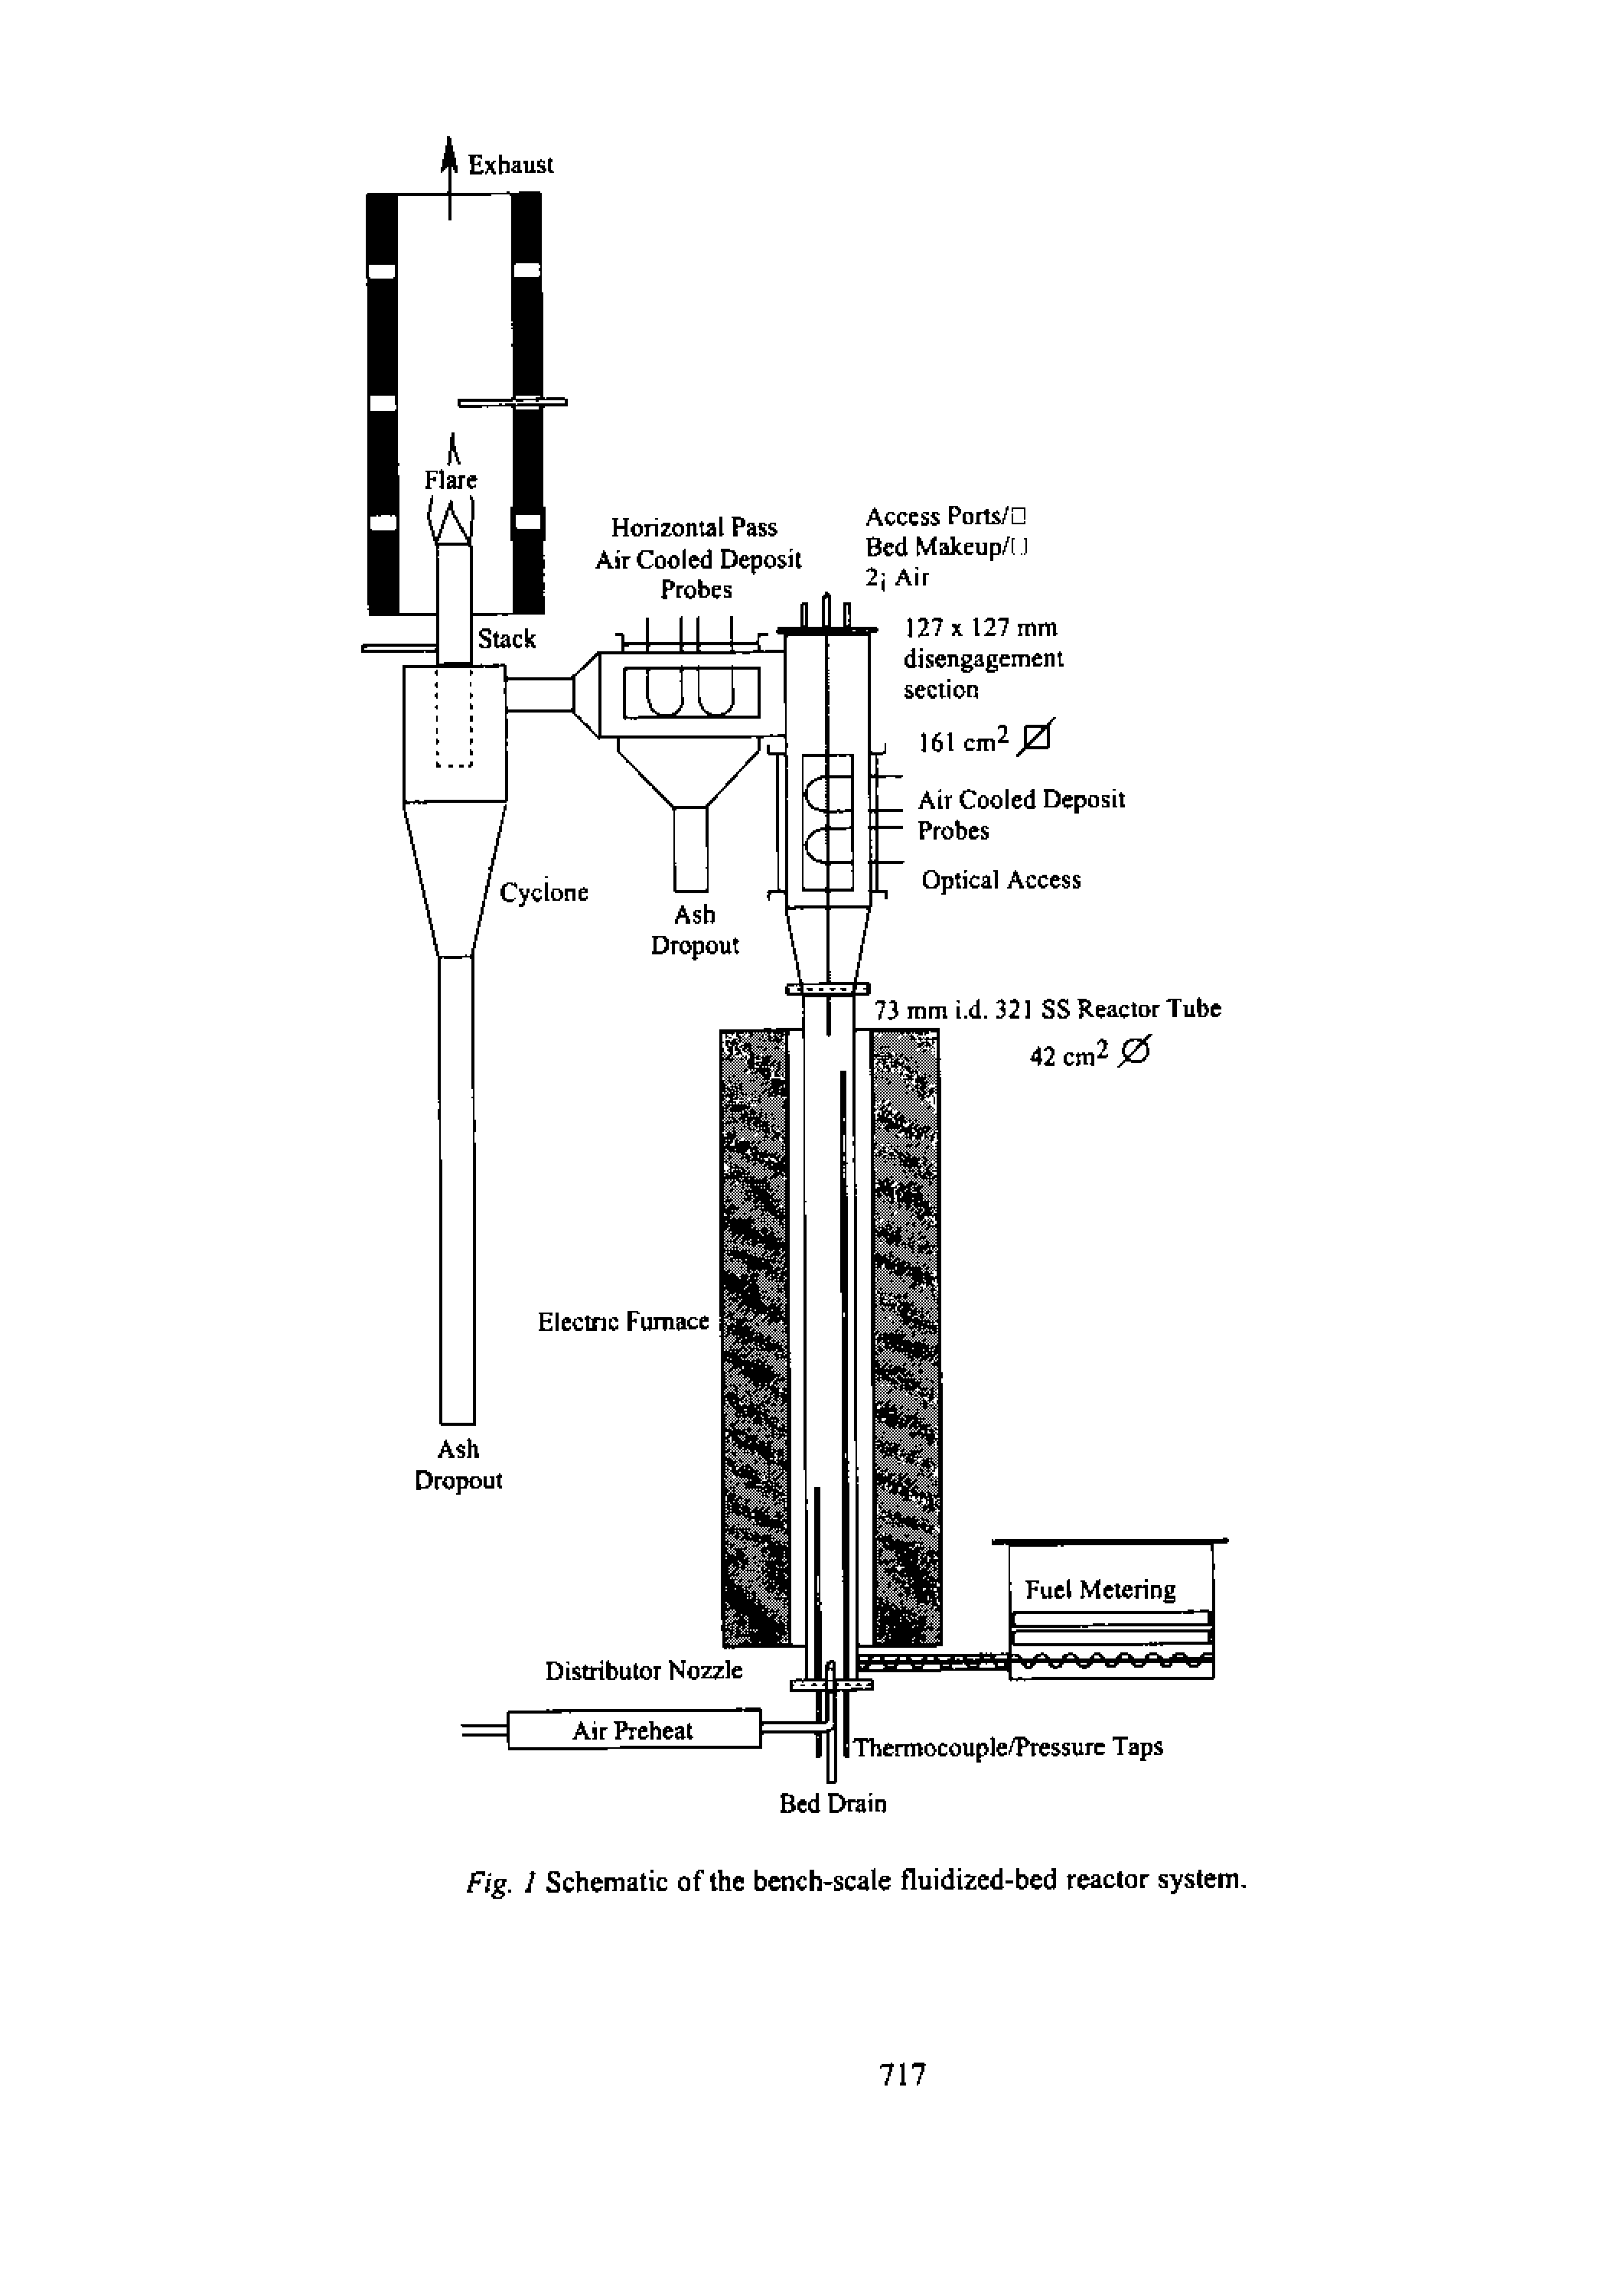 Fig. Schematic of the bench-scale fluidized-bed reactor system.